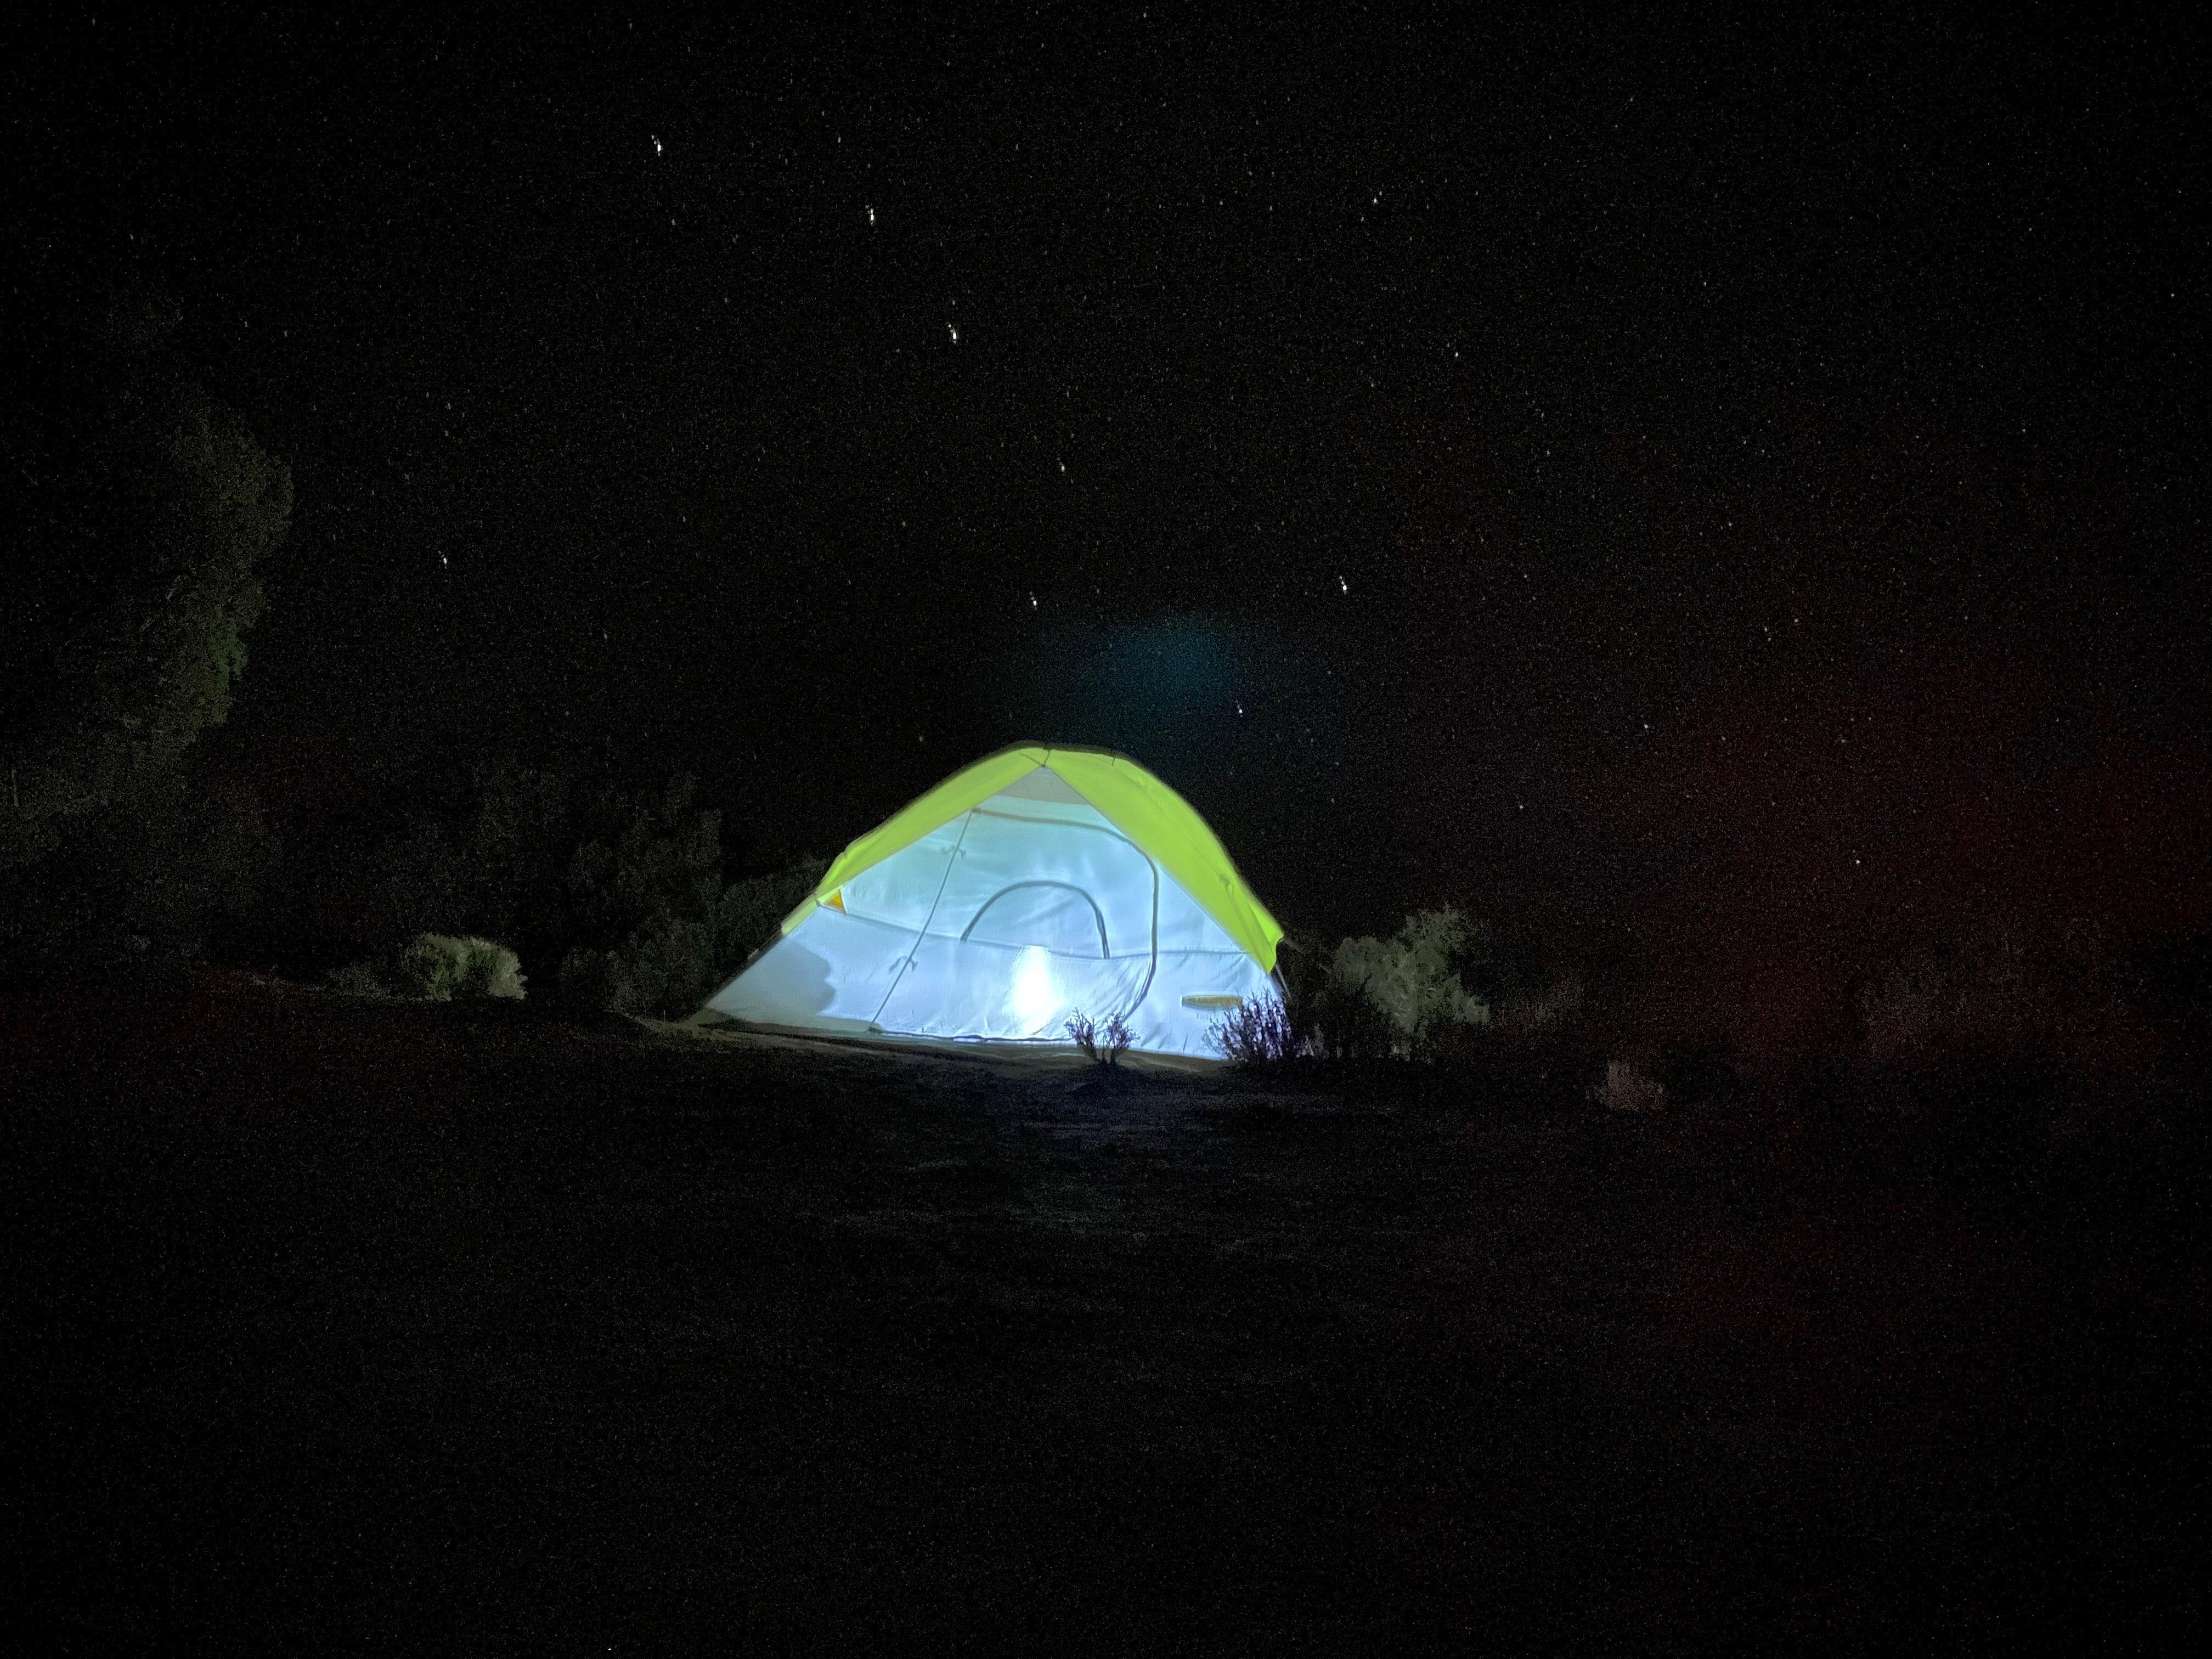 The Big Dipper over our tent!